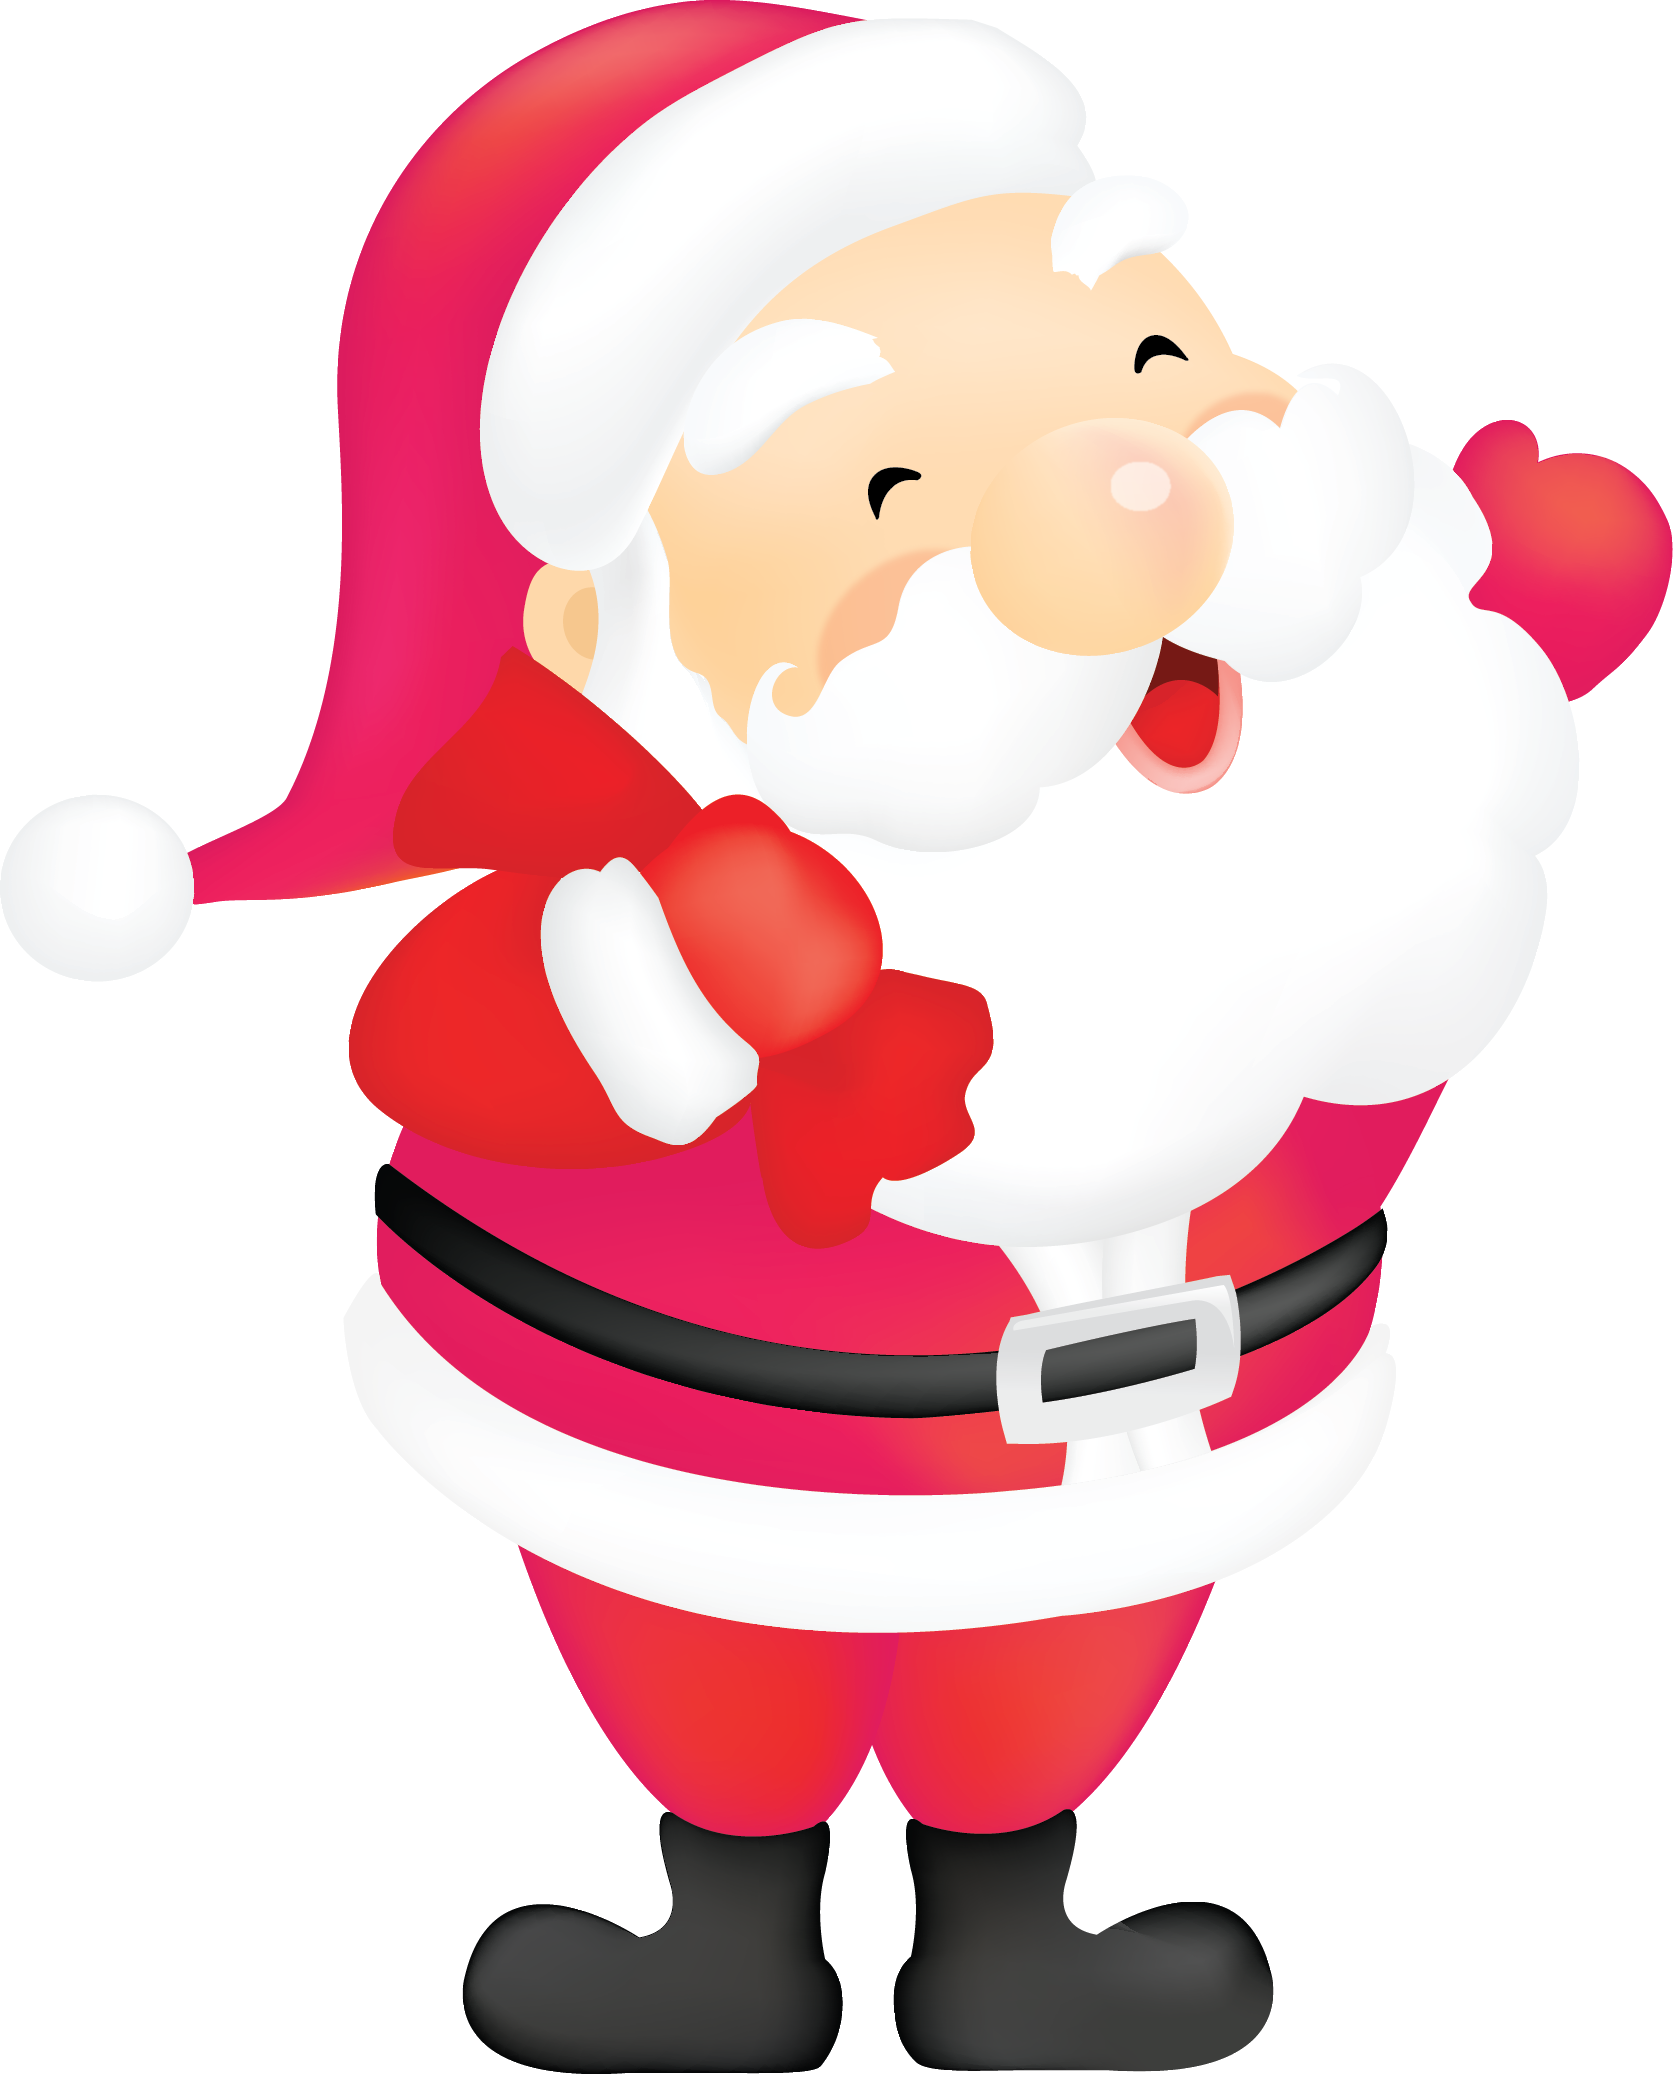 Father Christmas Clipart - ClipArt Best - ClipArt Best